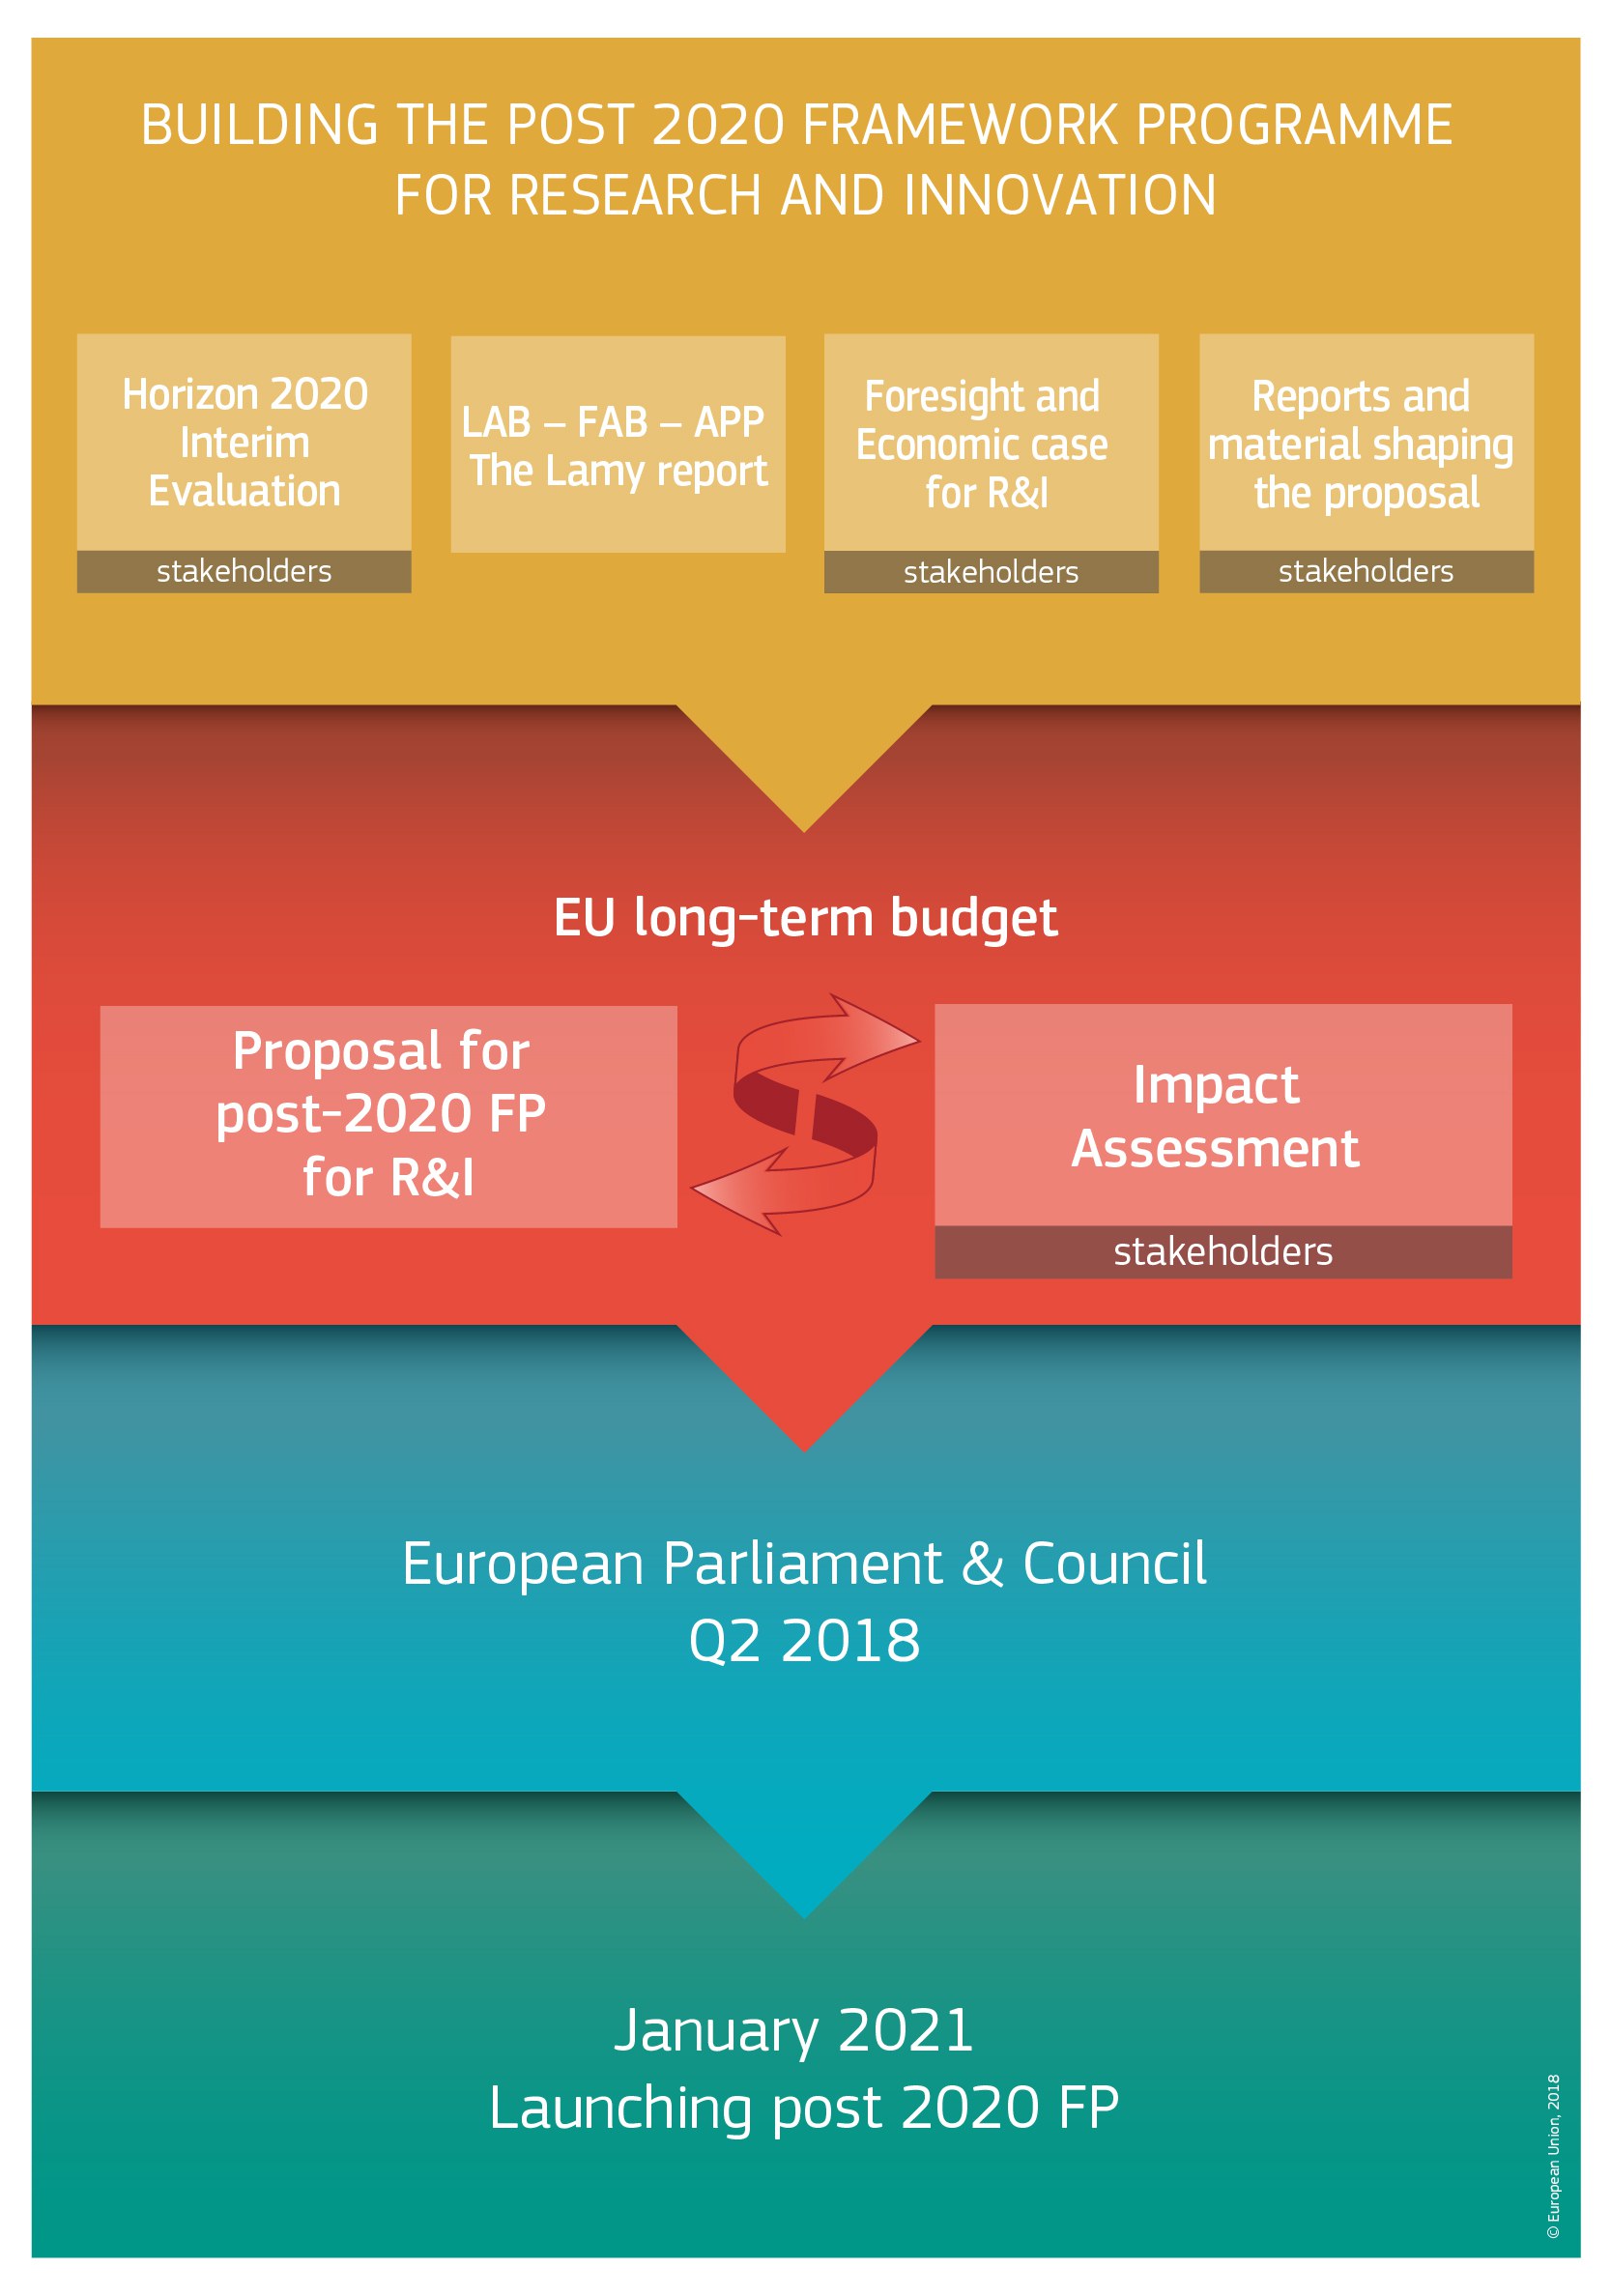 Building the post 2020 framework programme for research and innovation. Credits: European Union 2018.